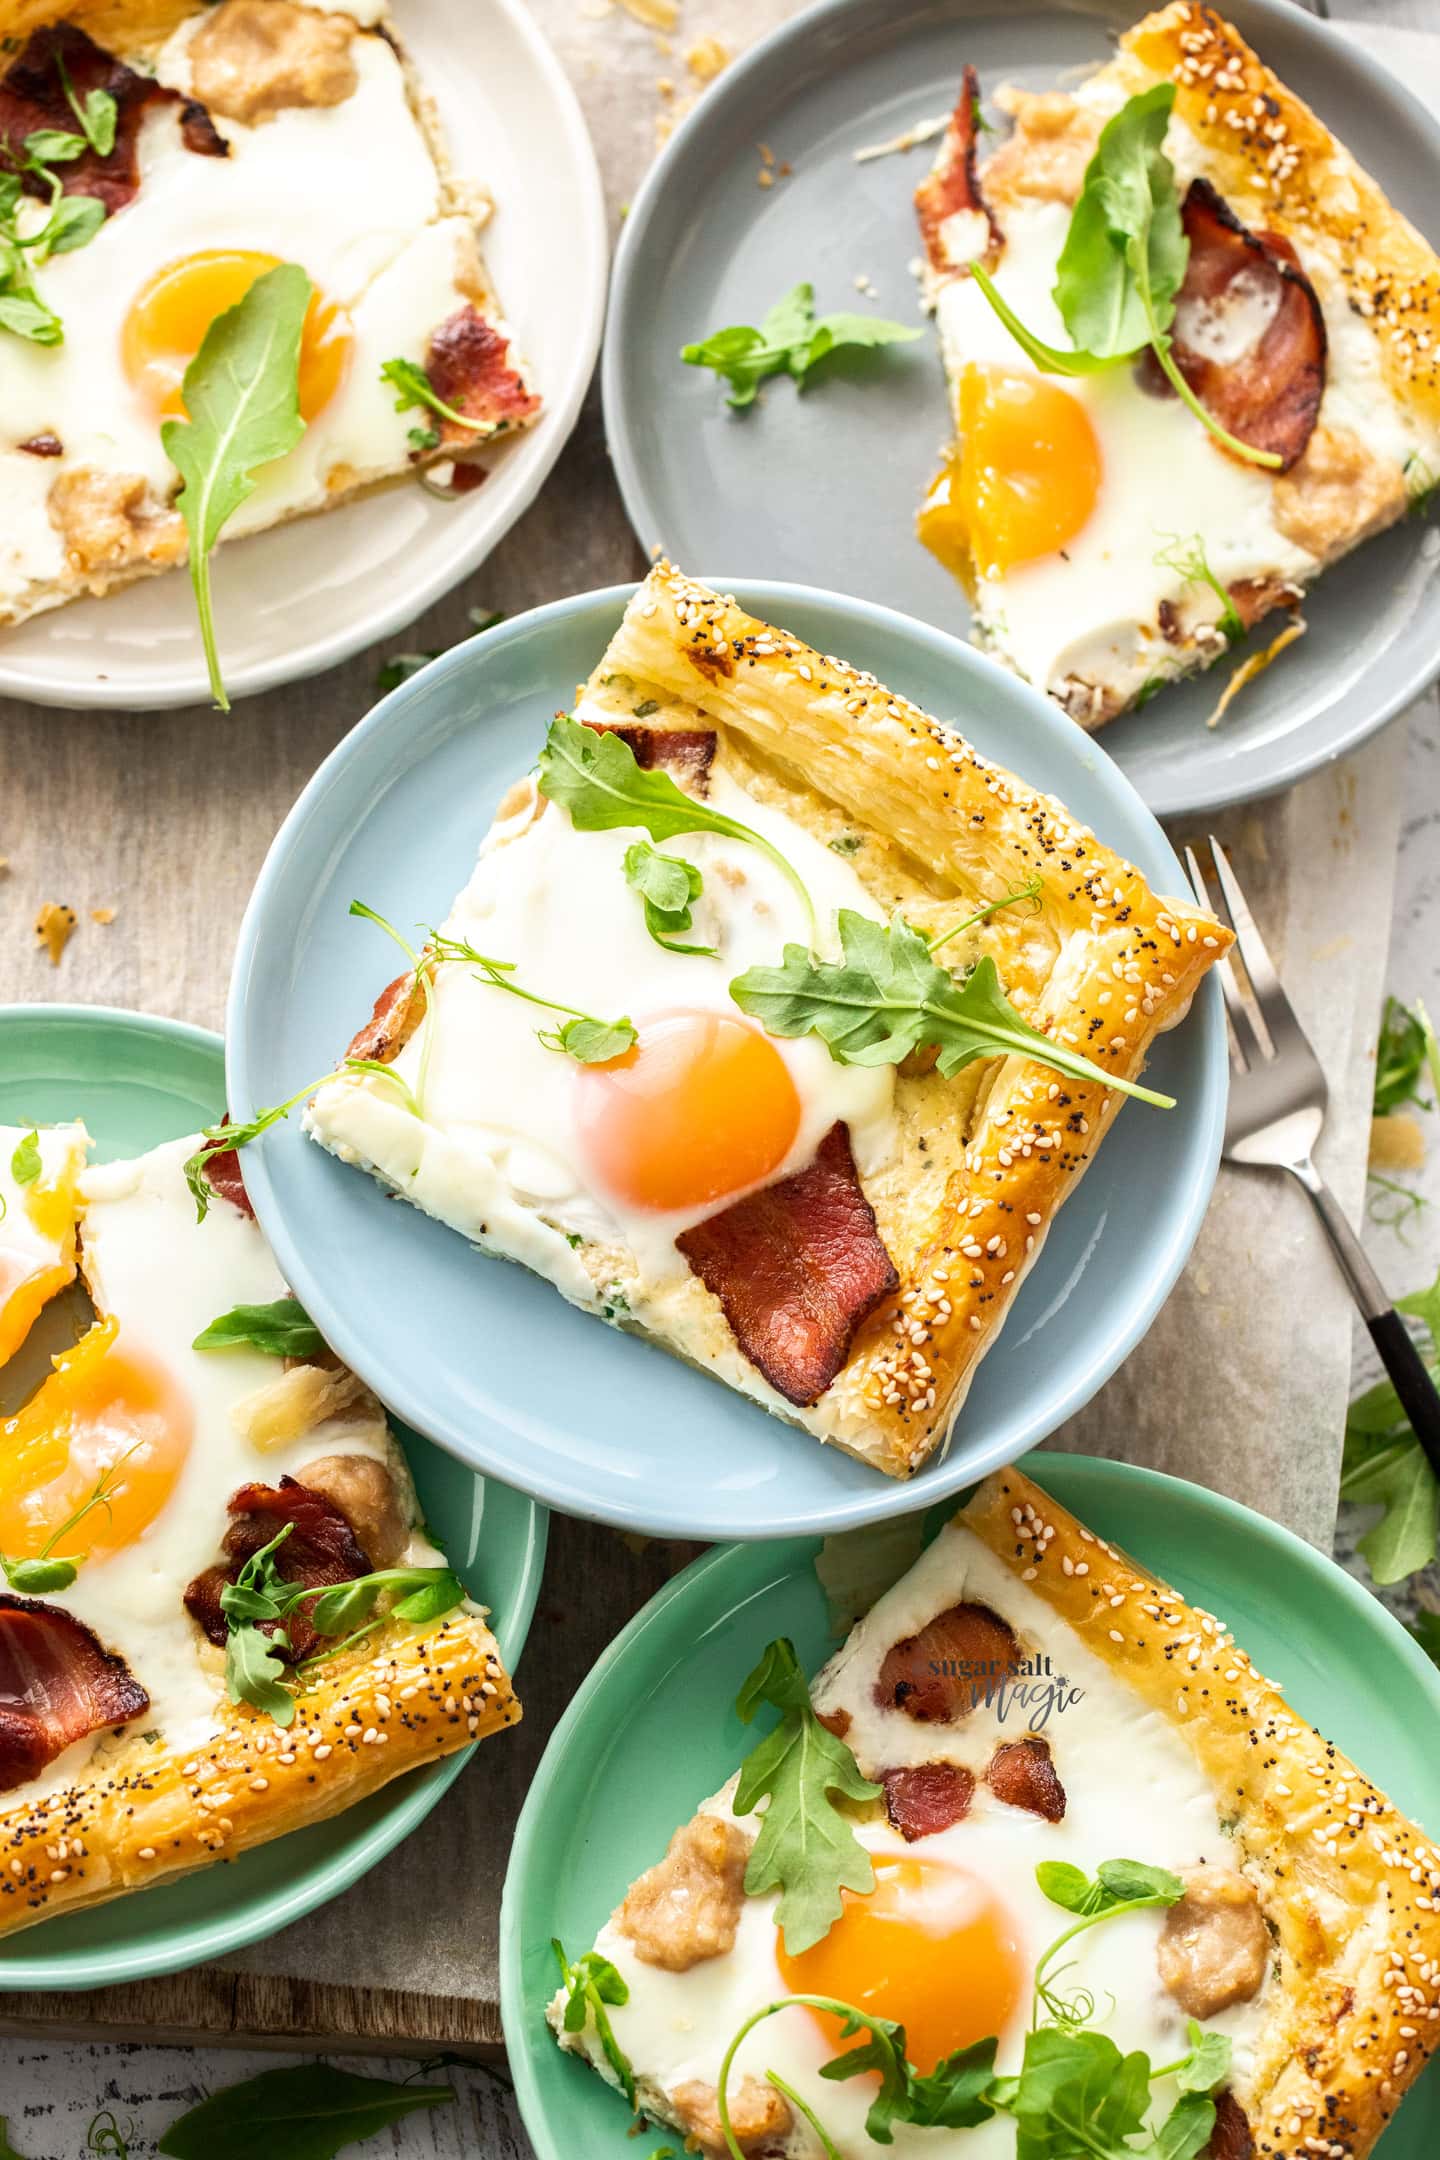 Top down view of slices of breakfast tart on colourful plates.